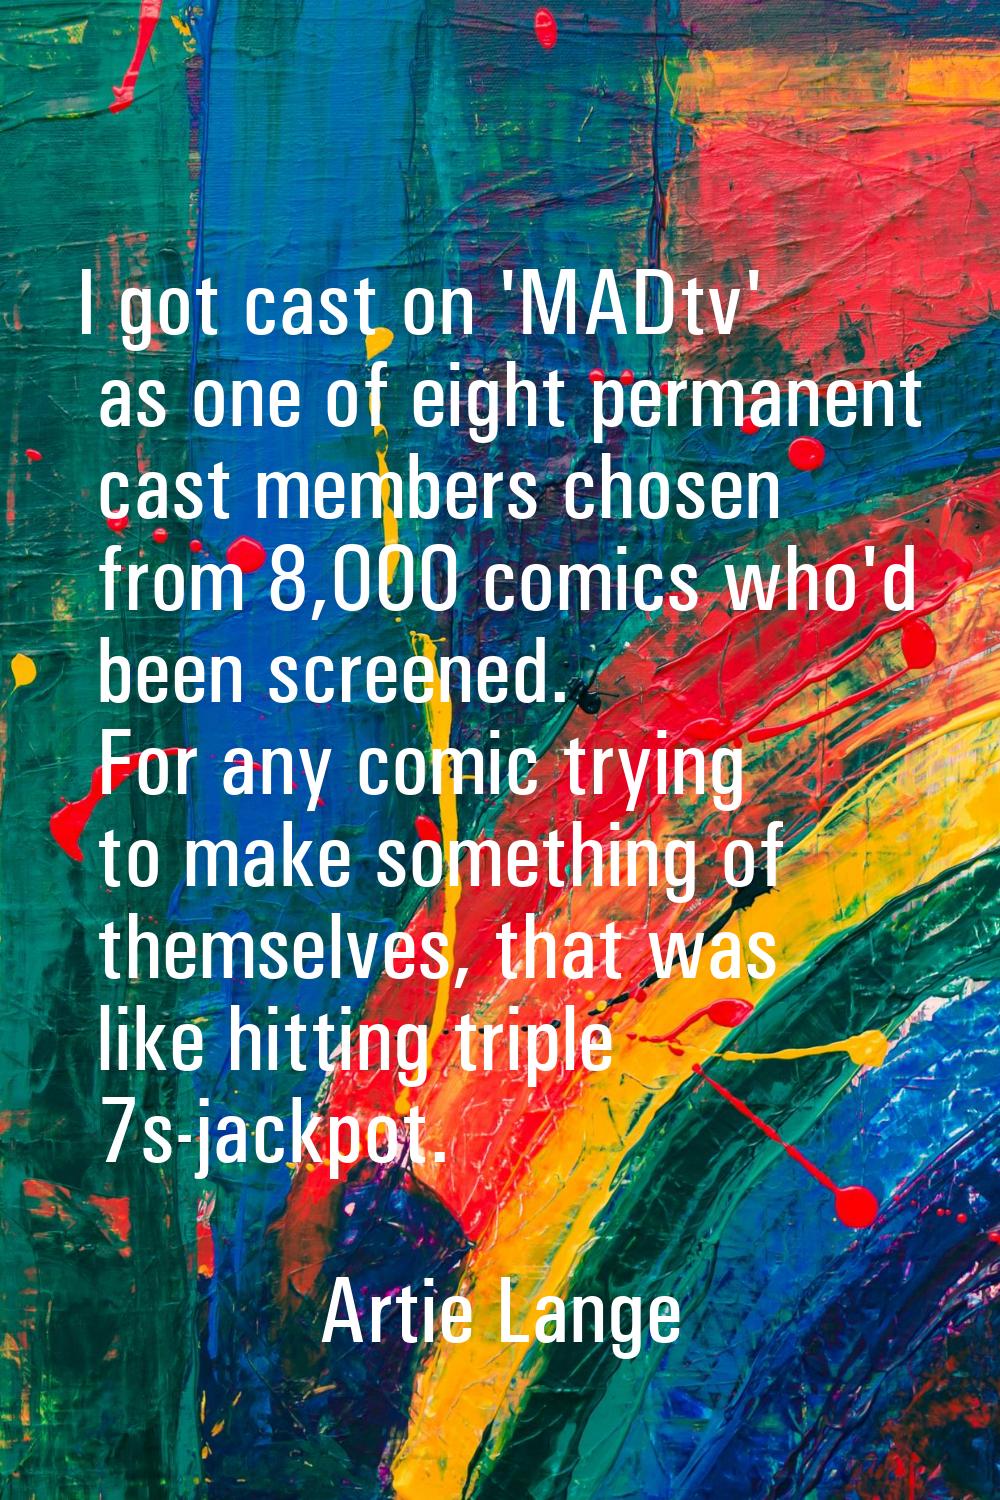 I got cast on 'MADtv' as one of eight permanent cast members chosen from 8,000 comics who'd been sc